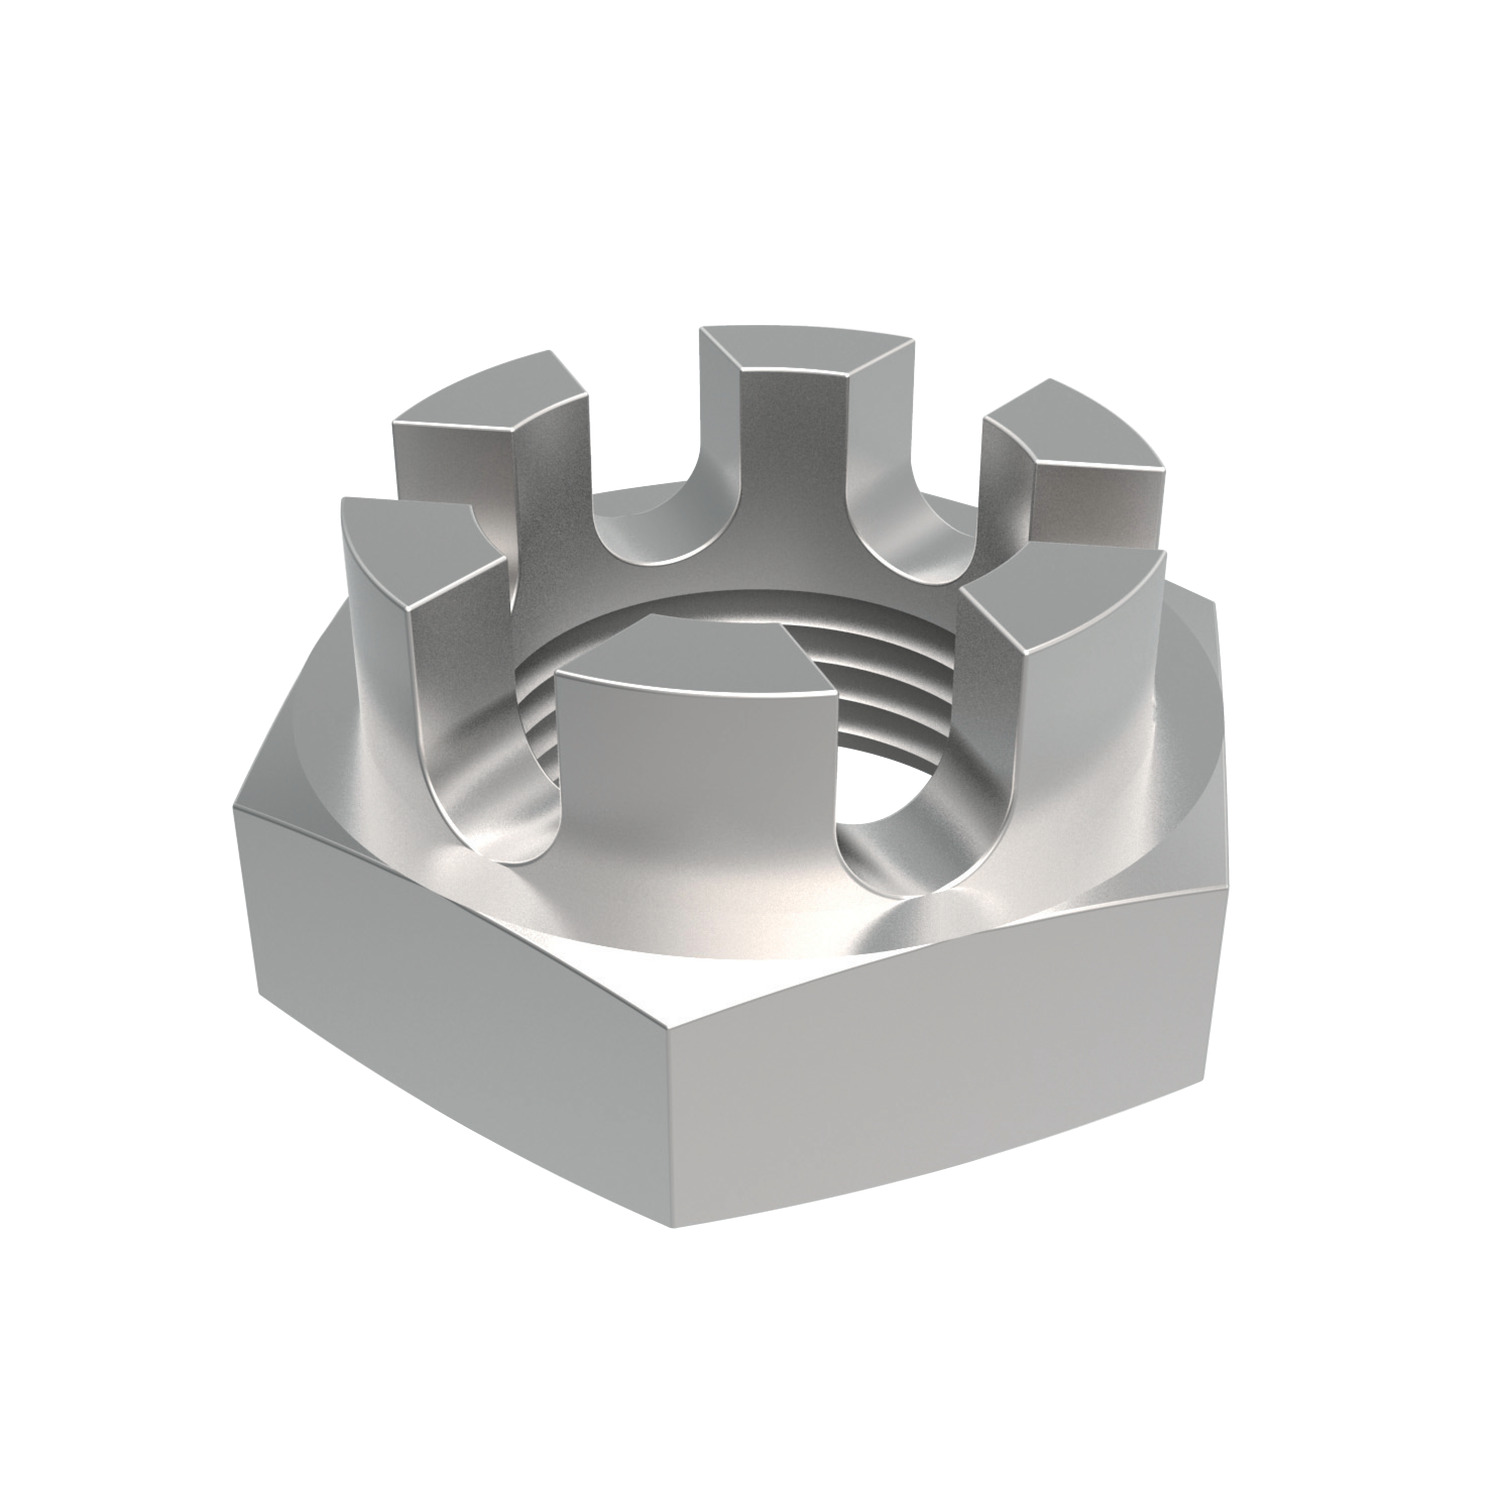 Hexagon Castle Nuts Thin Type Thin hexagon castle nuts made from A2 stainless steel. Sizes from M6 to M30. Manufactured to DIN 937.